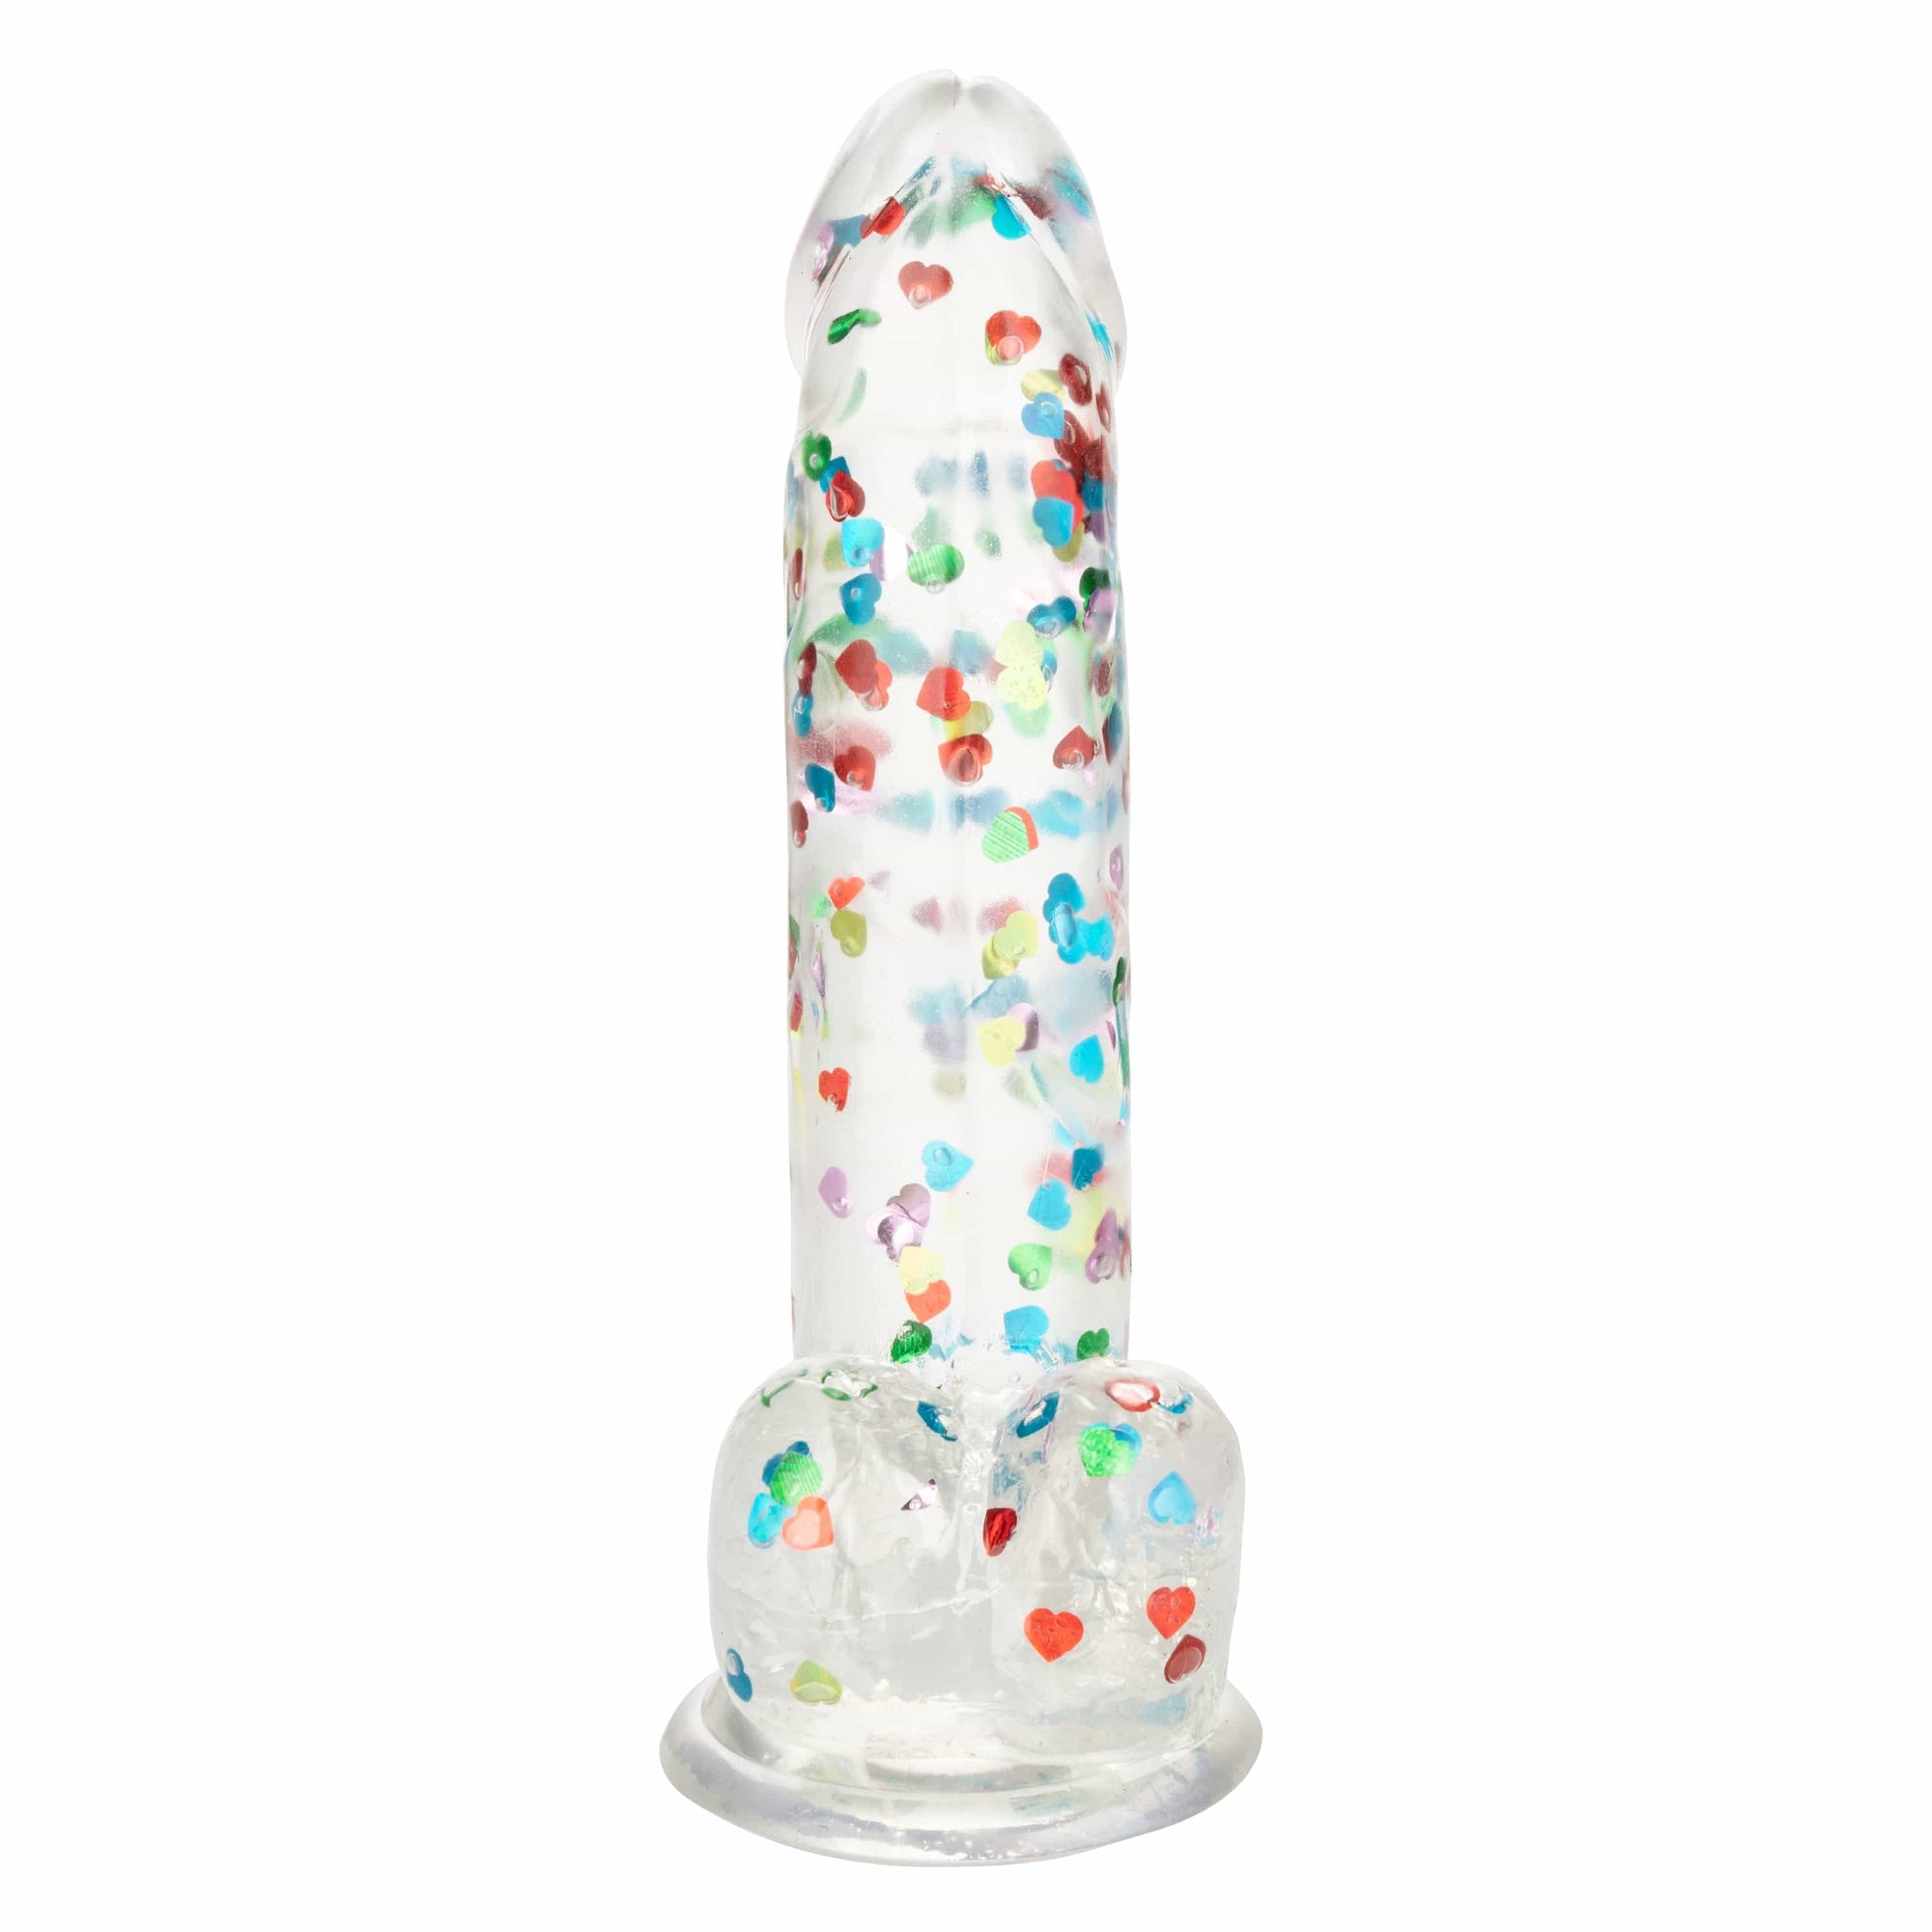 California Exotics - Naughty Bits I Love Dick Heart filled Dong Realistic Dildo with Balls 8" (Clear) Clit Massager (Vibration) Rechargeable 716770101273 CherryAffairs